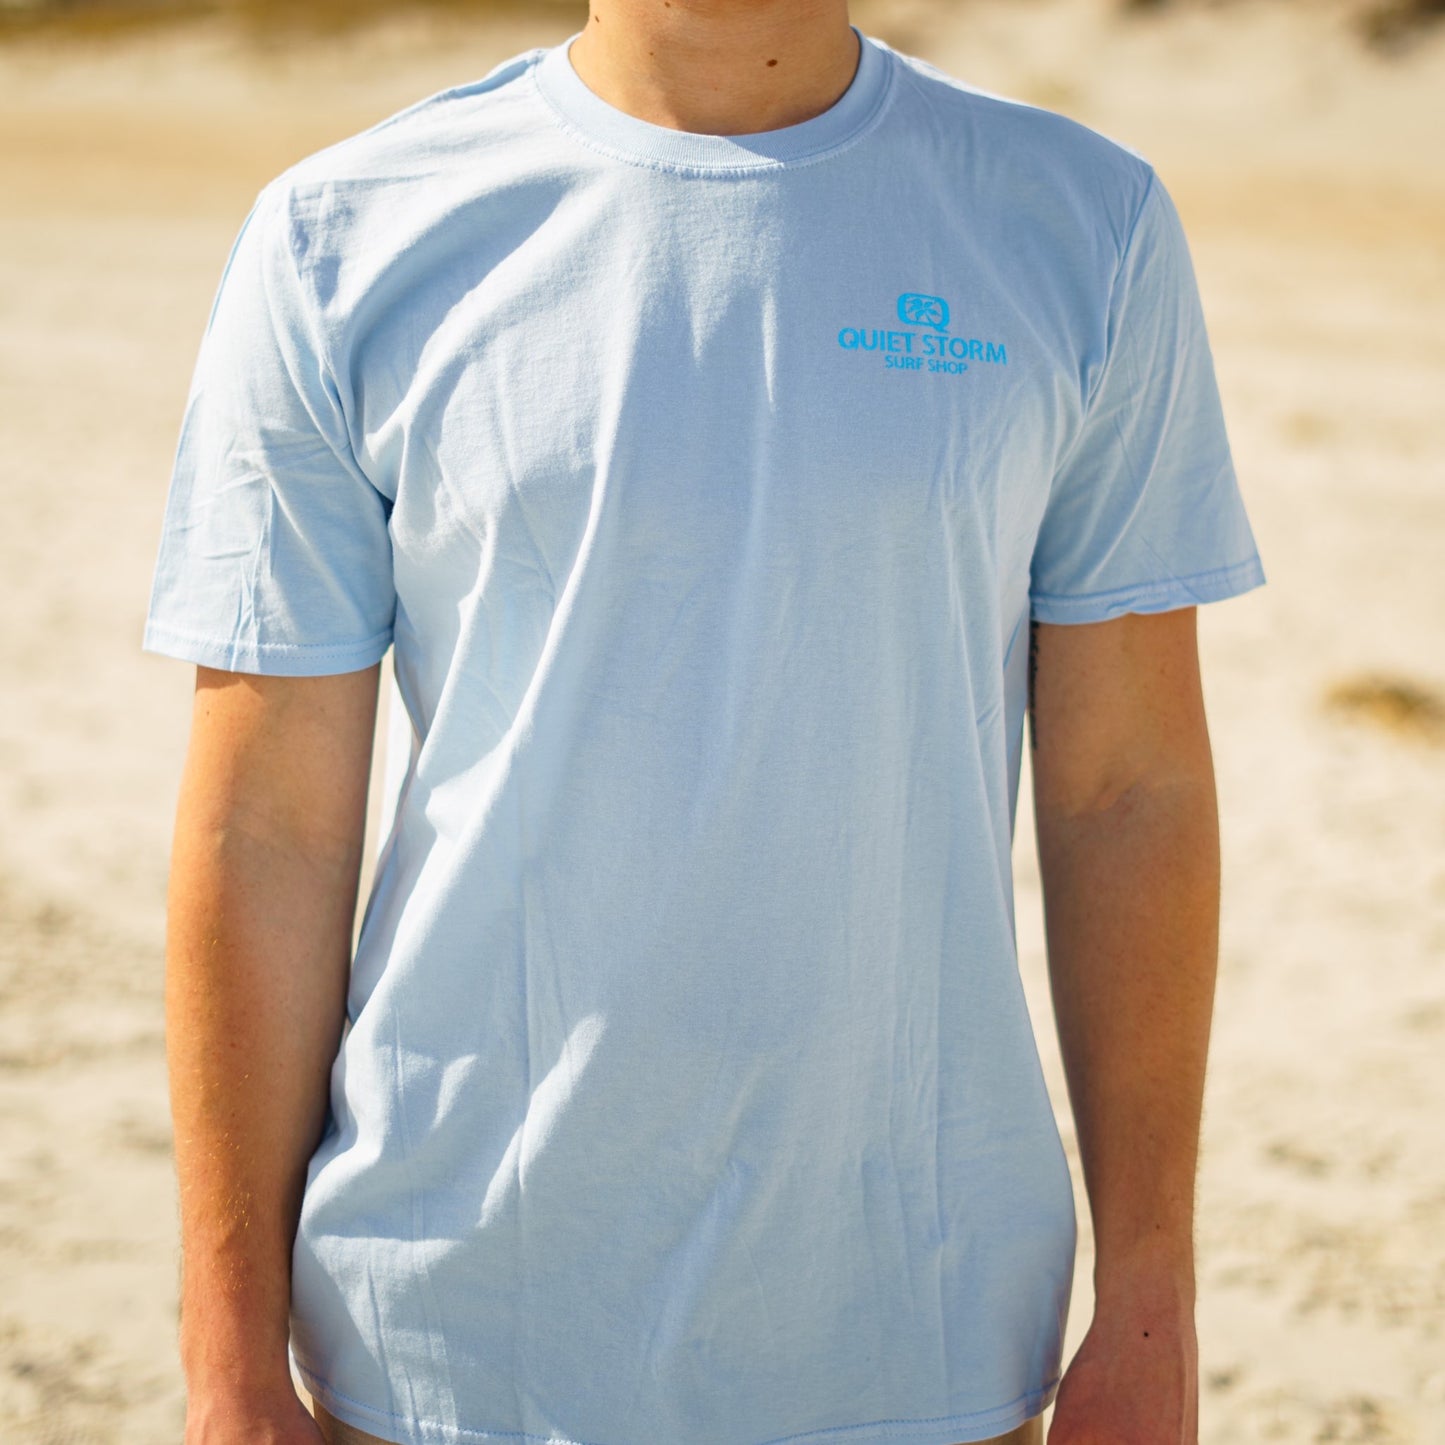 Hit The Waves Palm Tee